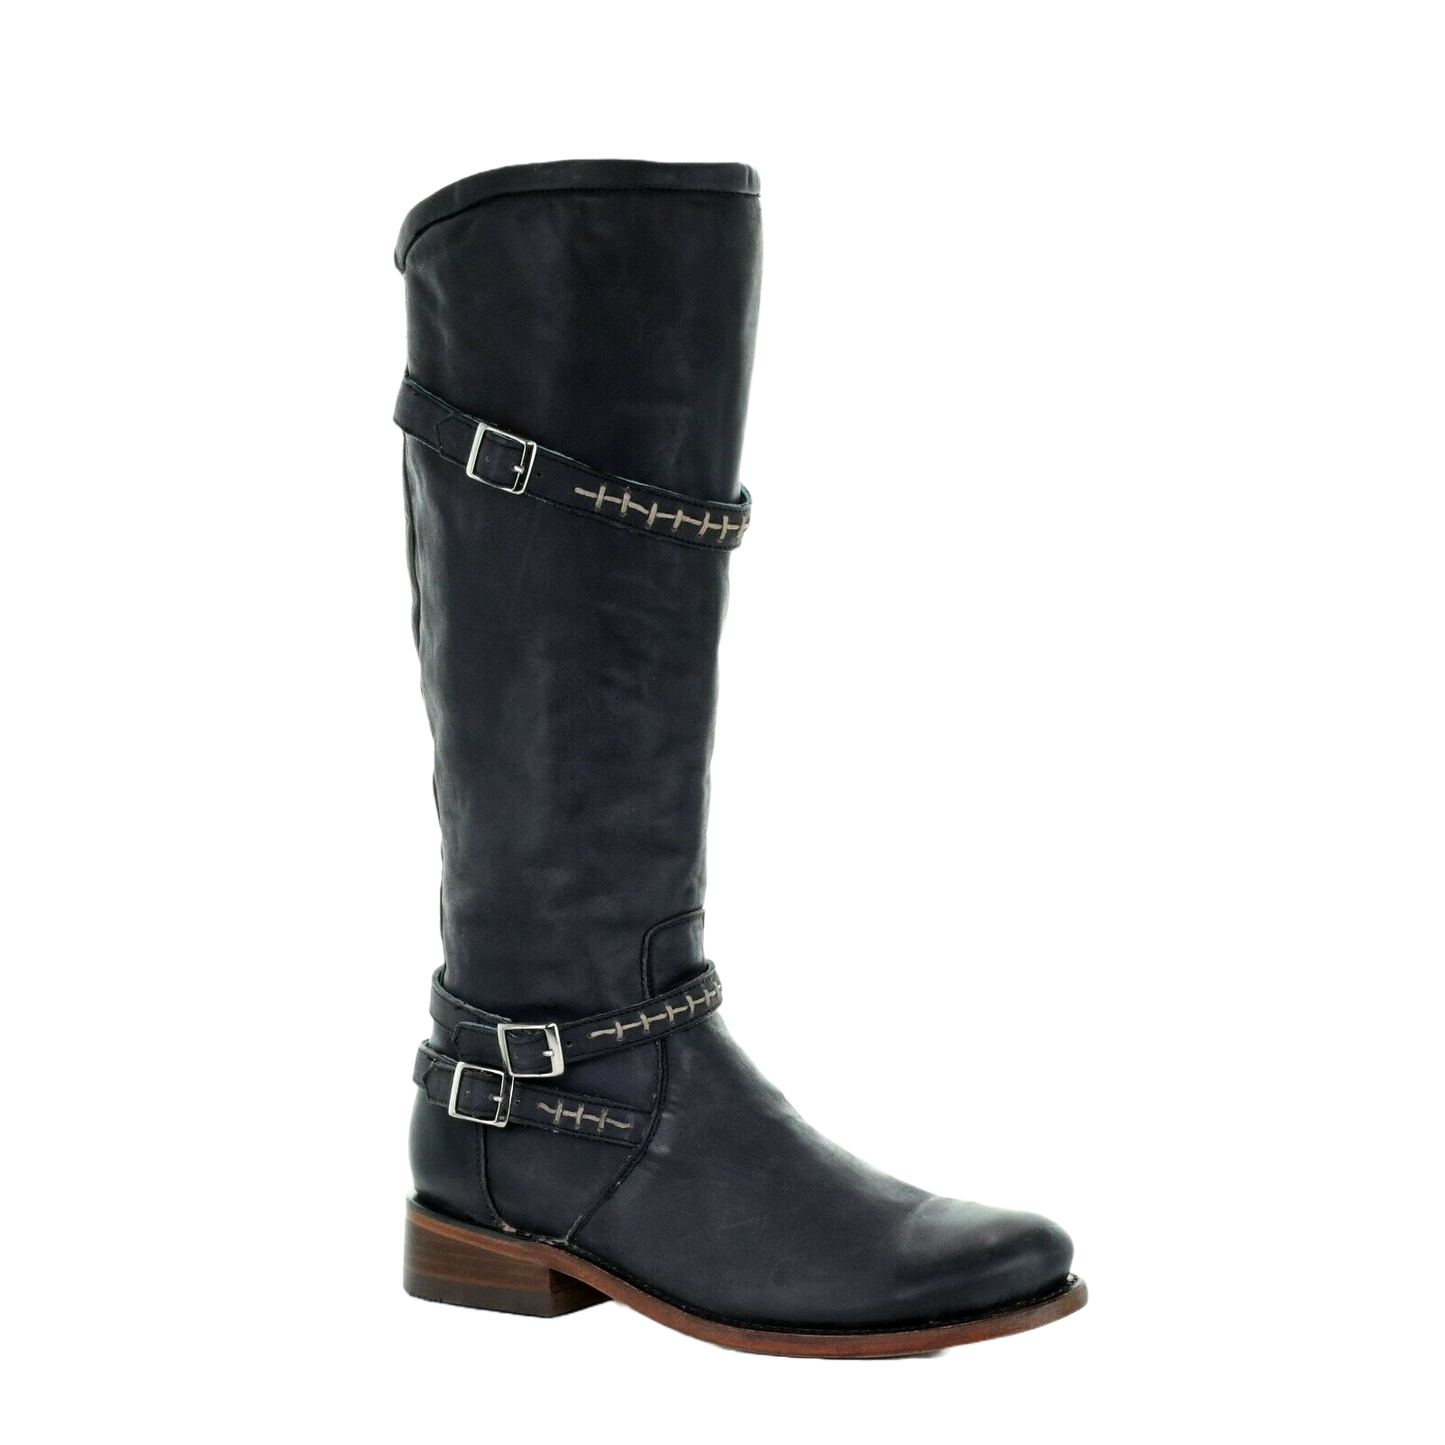 Circle G by Corral Ladies Black Woven & Straps Round Toe Boots Q5041